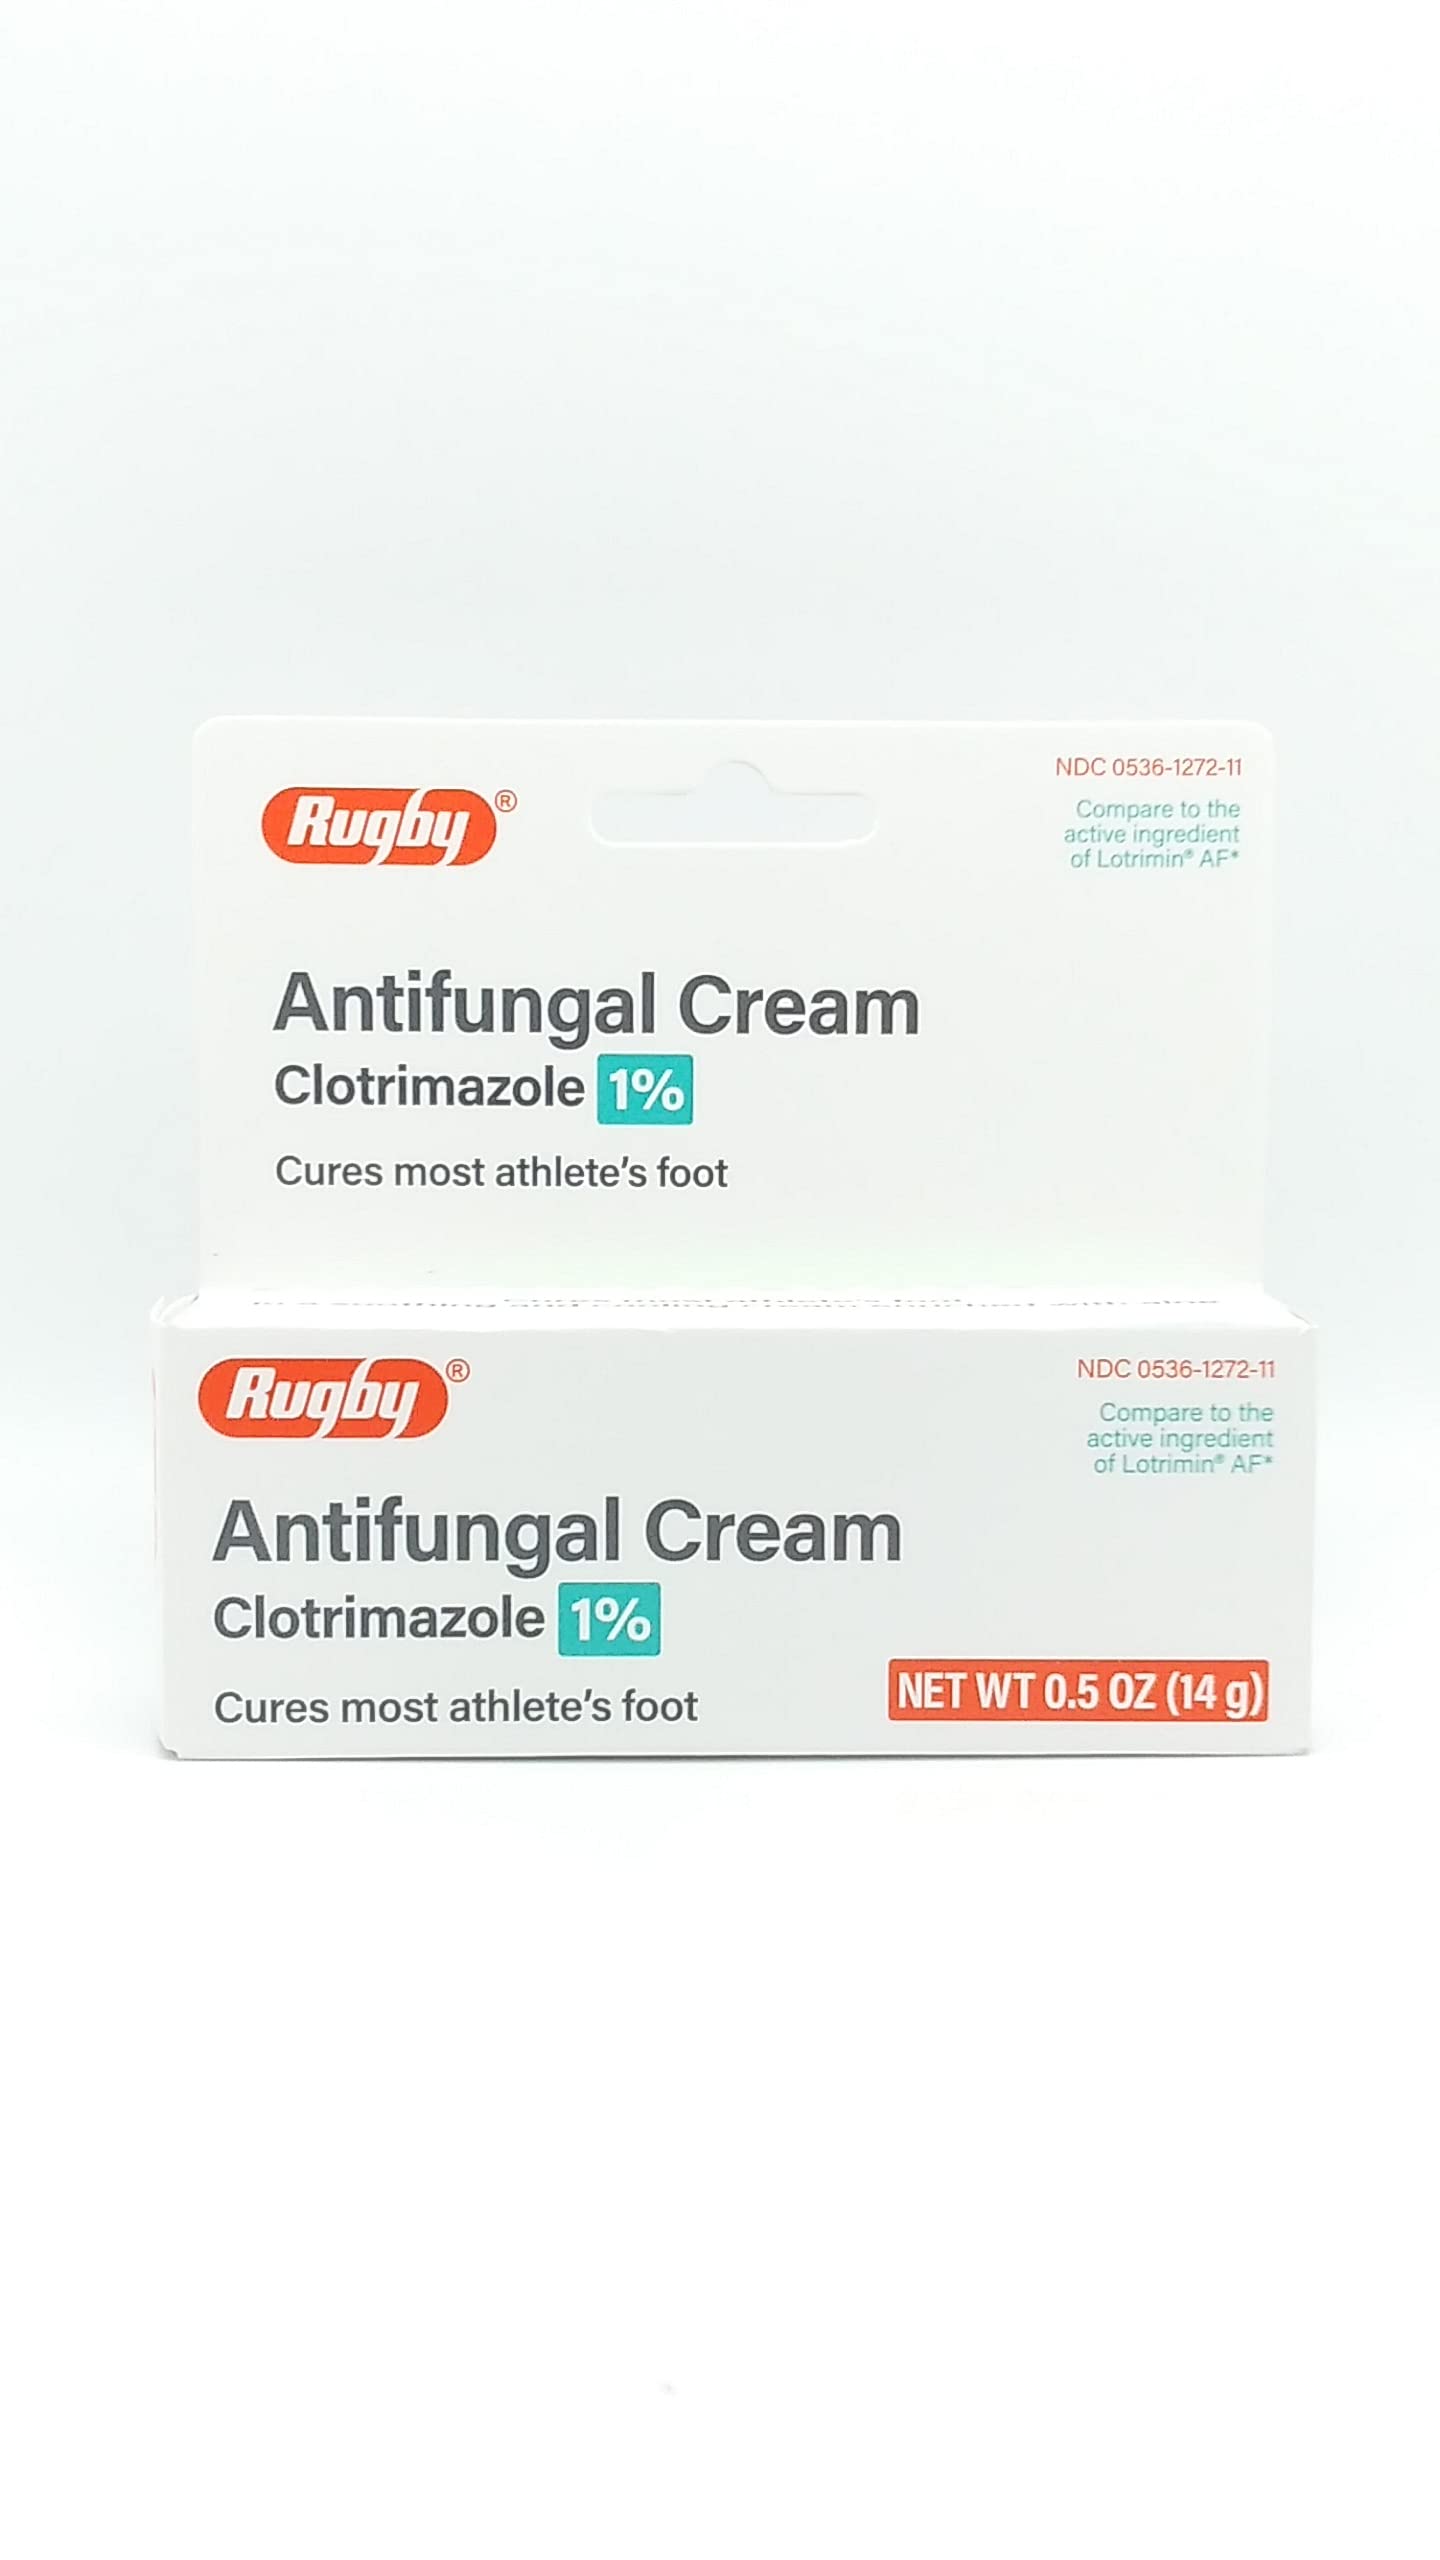 Rugby Laboratories Antifungal Cream Clotrimazole 1% Cures Most Athletes Foot 0.5oz (14g) Relieves Itching Burning Cracking, Scaling, and Discomfort NDC 0536-1272-11 (Pack of 1)